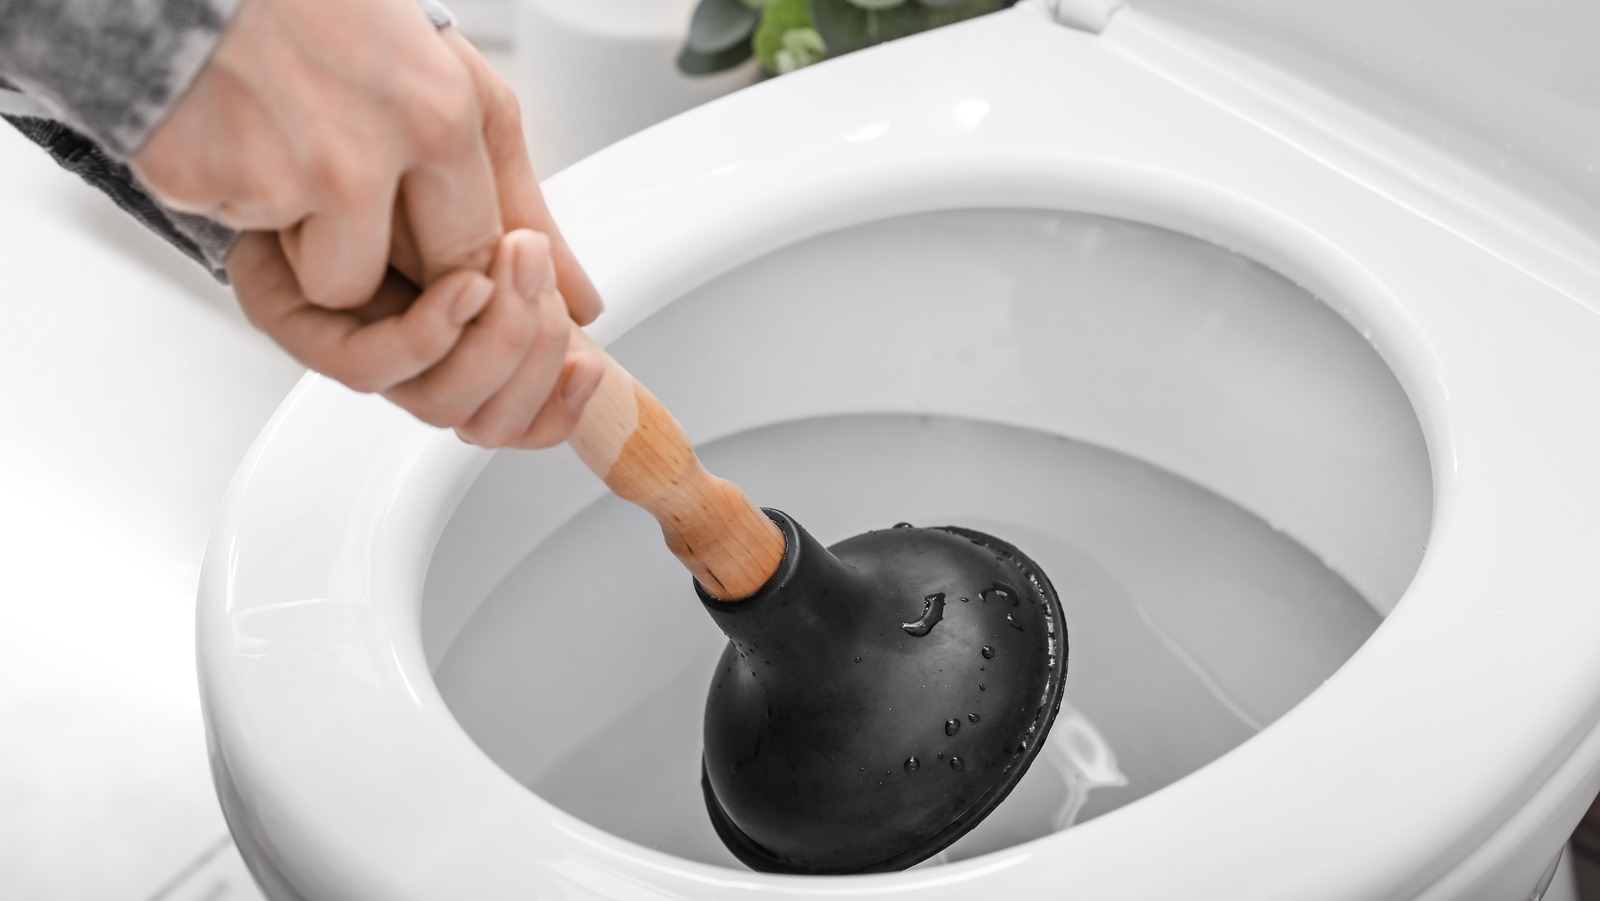 Small Compact Plunger Powerful Ergonomic Handle Bathroom Kitchen